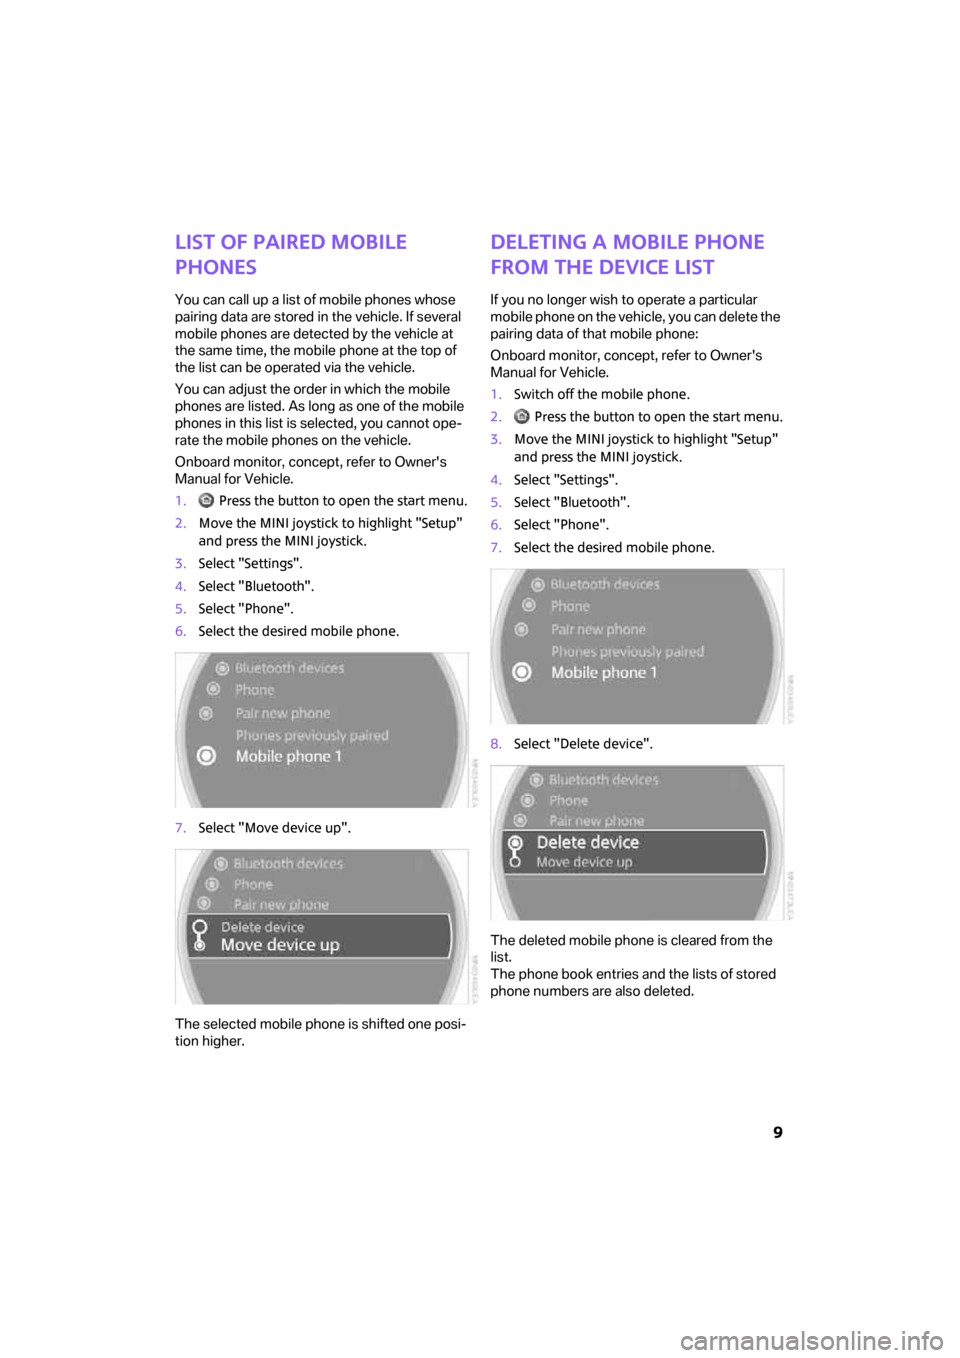 MINI Clubman 2008  Owners Manual (Mini Connected)  9
List of paired mobile 
phones
You can call up a list of mobile phones whose 
pairing data are stored in the vehicle. If several 
mobile phones are detected by the vehicle at 
the same time, the mob